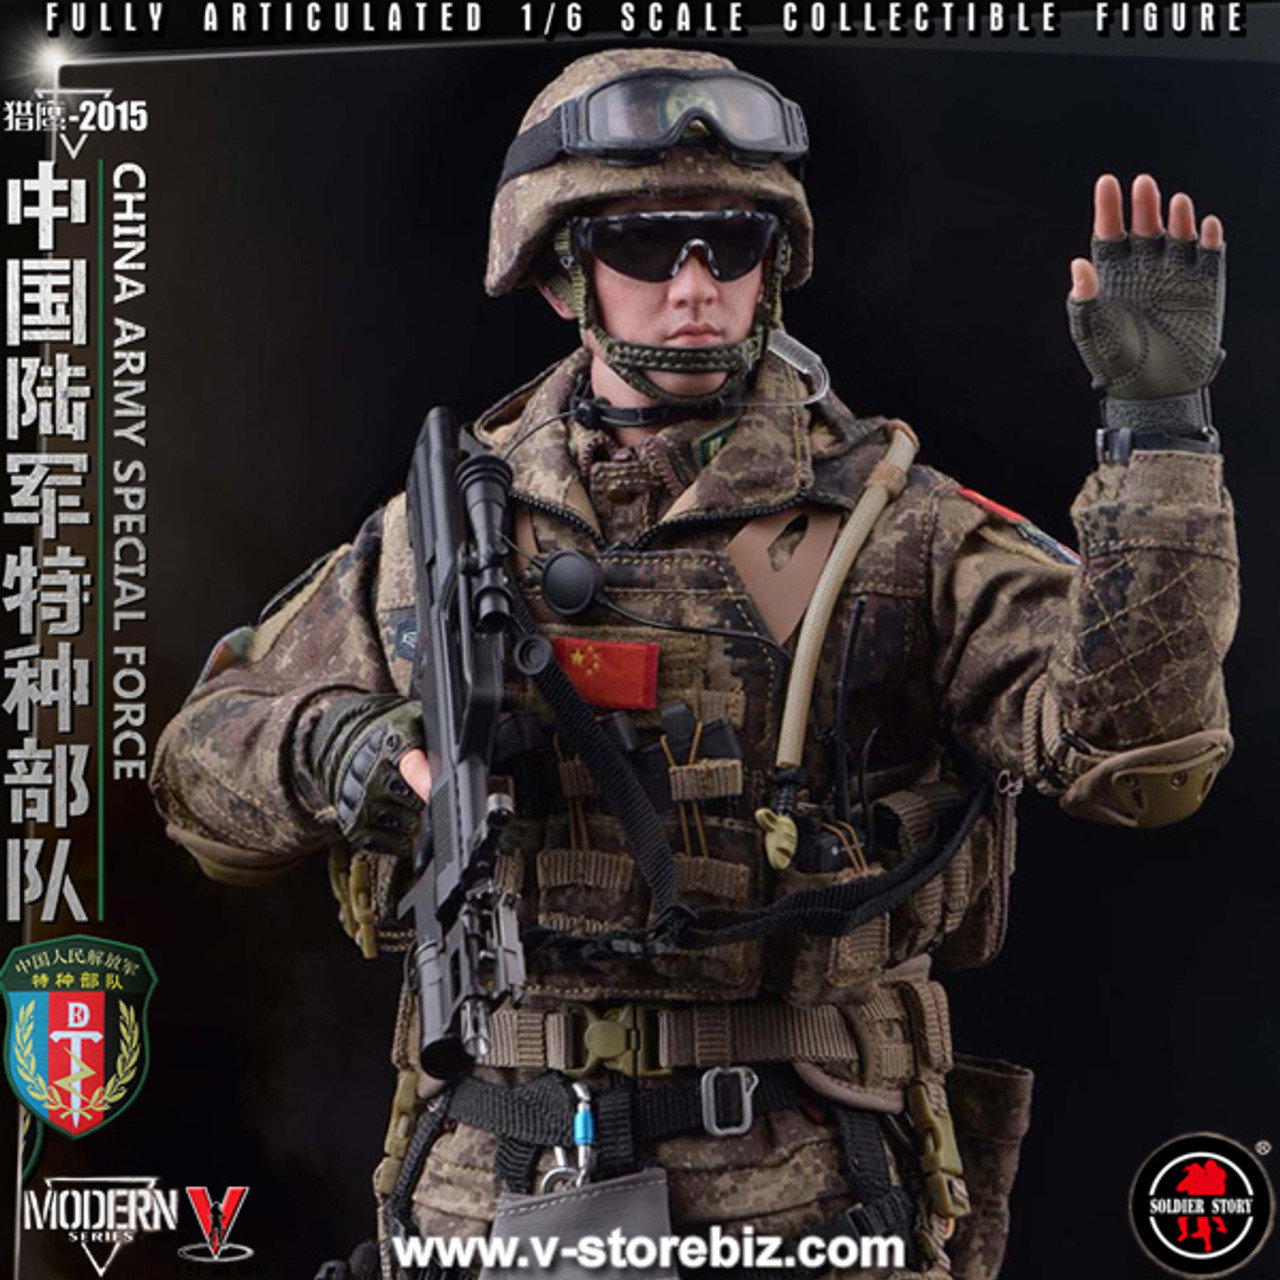 Soldier Story 1/6 12 French Special Force Action Figure – Lavits Figure